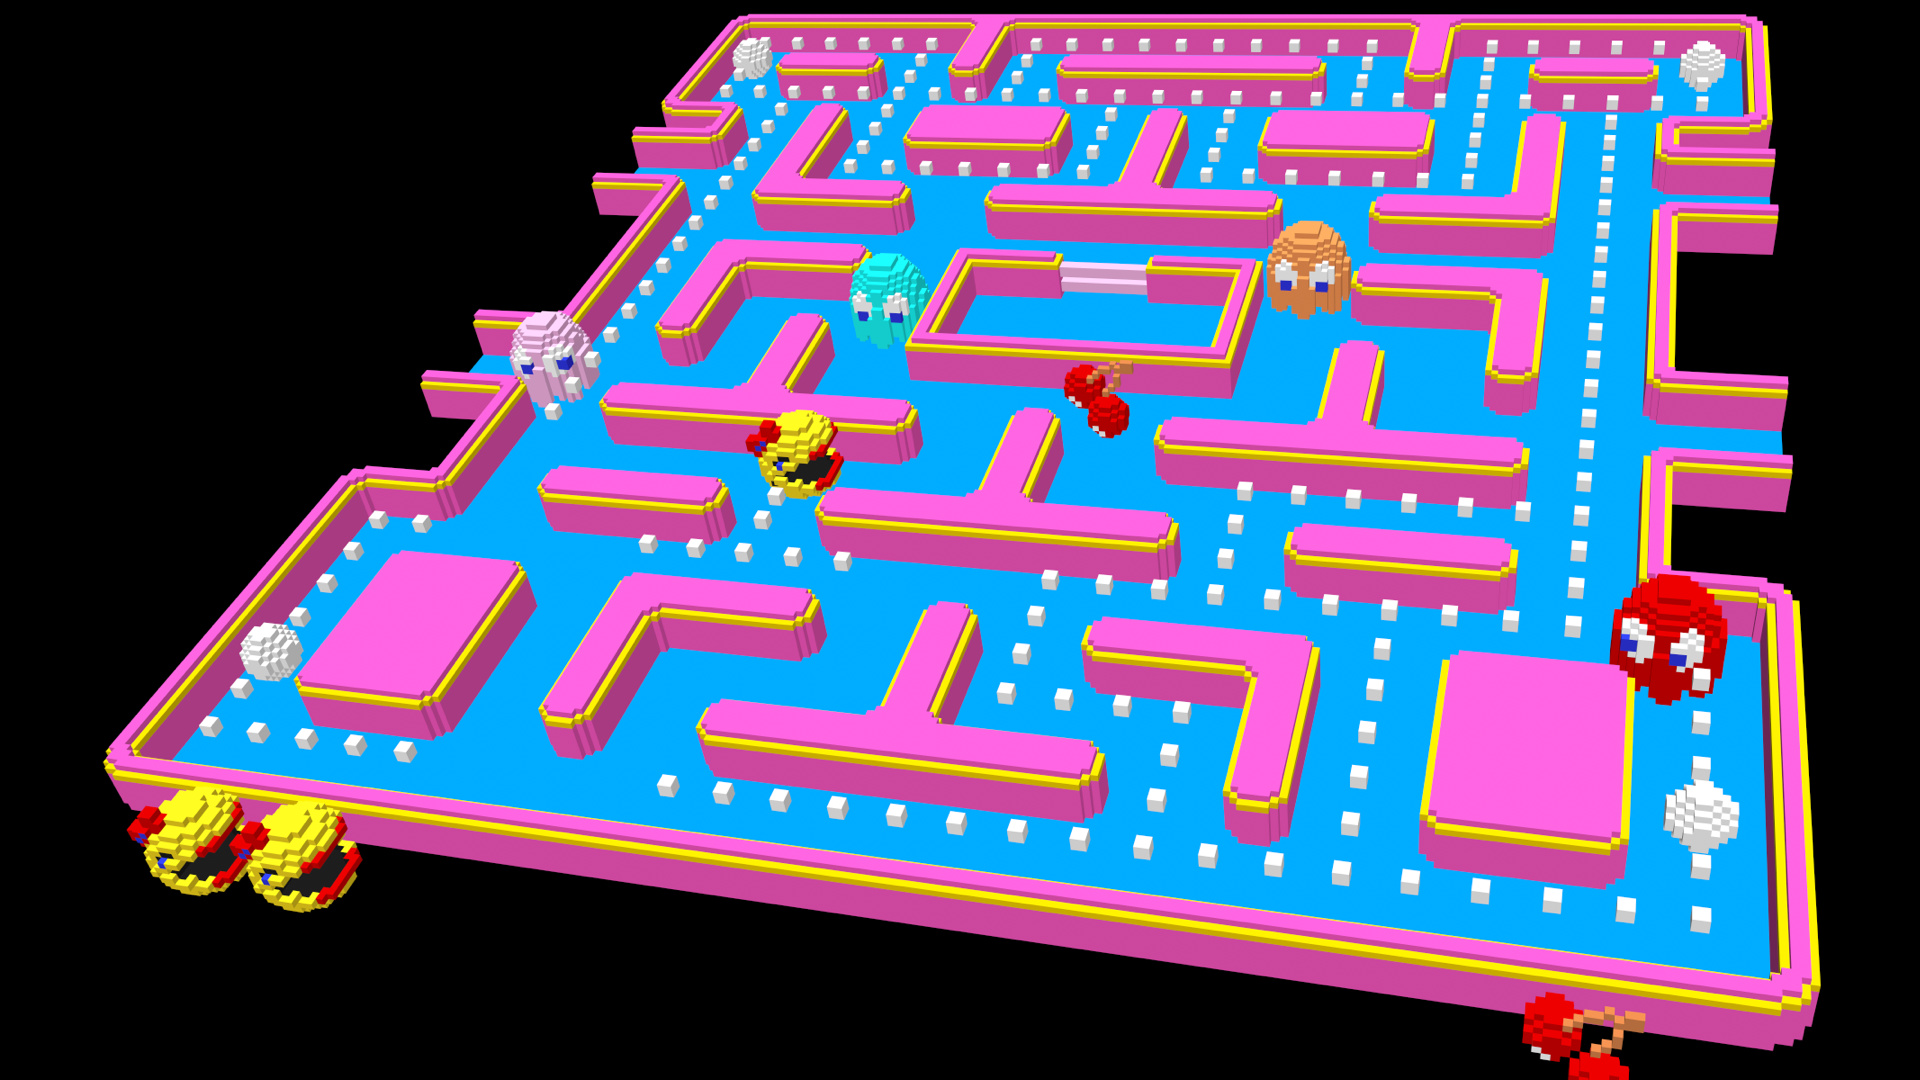 A colorful arcade game featuring Pac-Man traversing a maze of dots and ghosts.